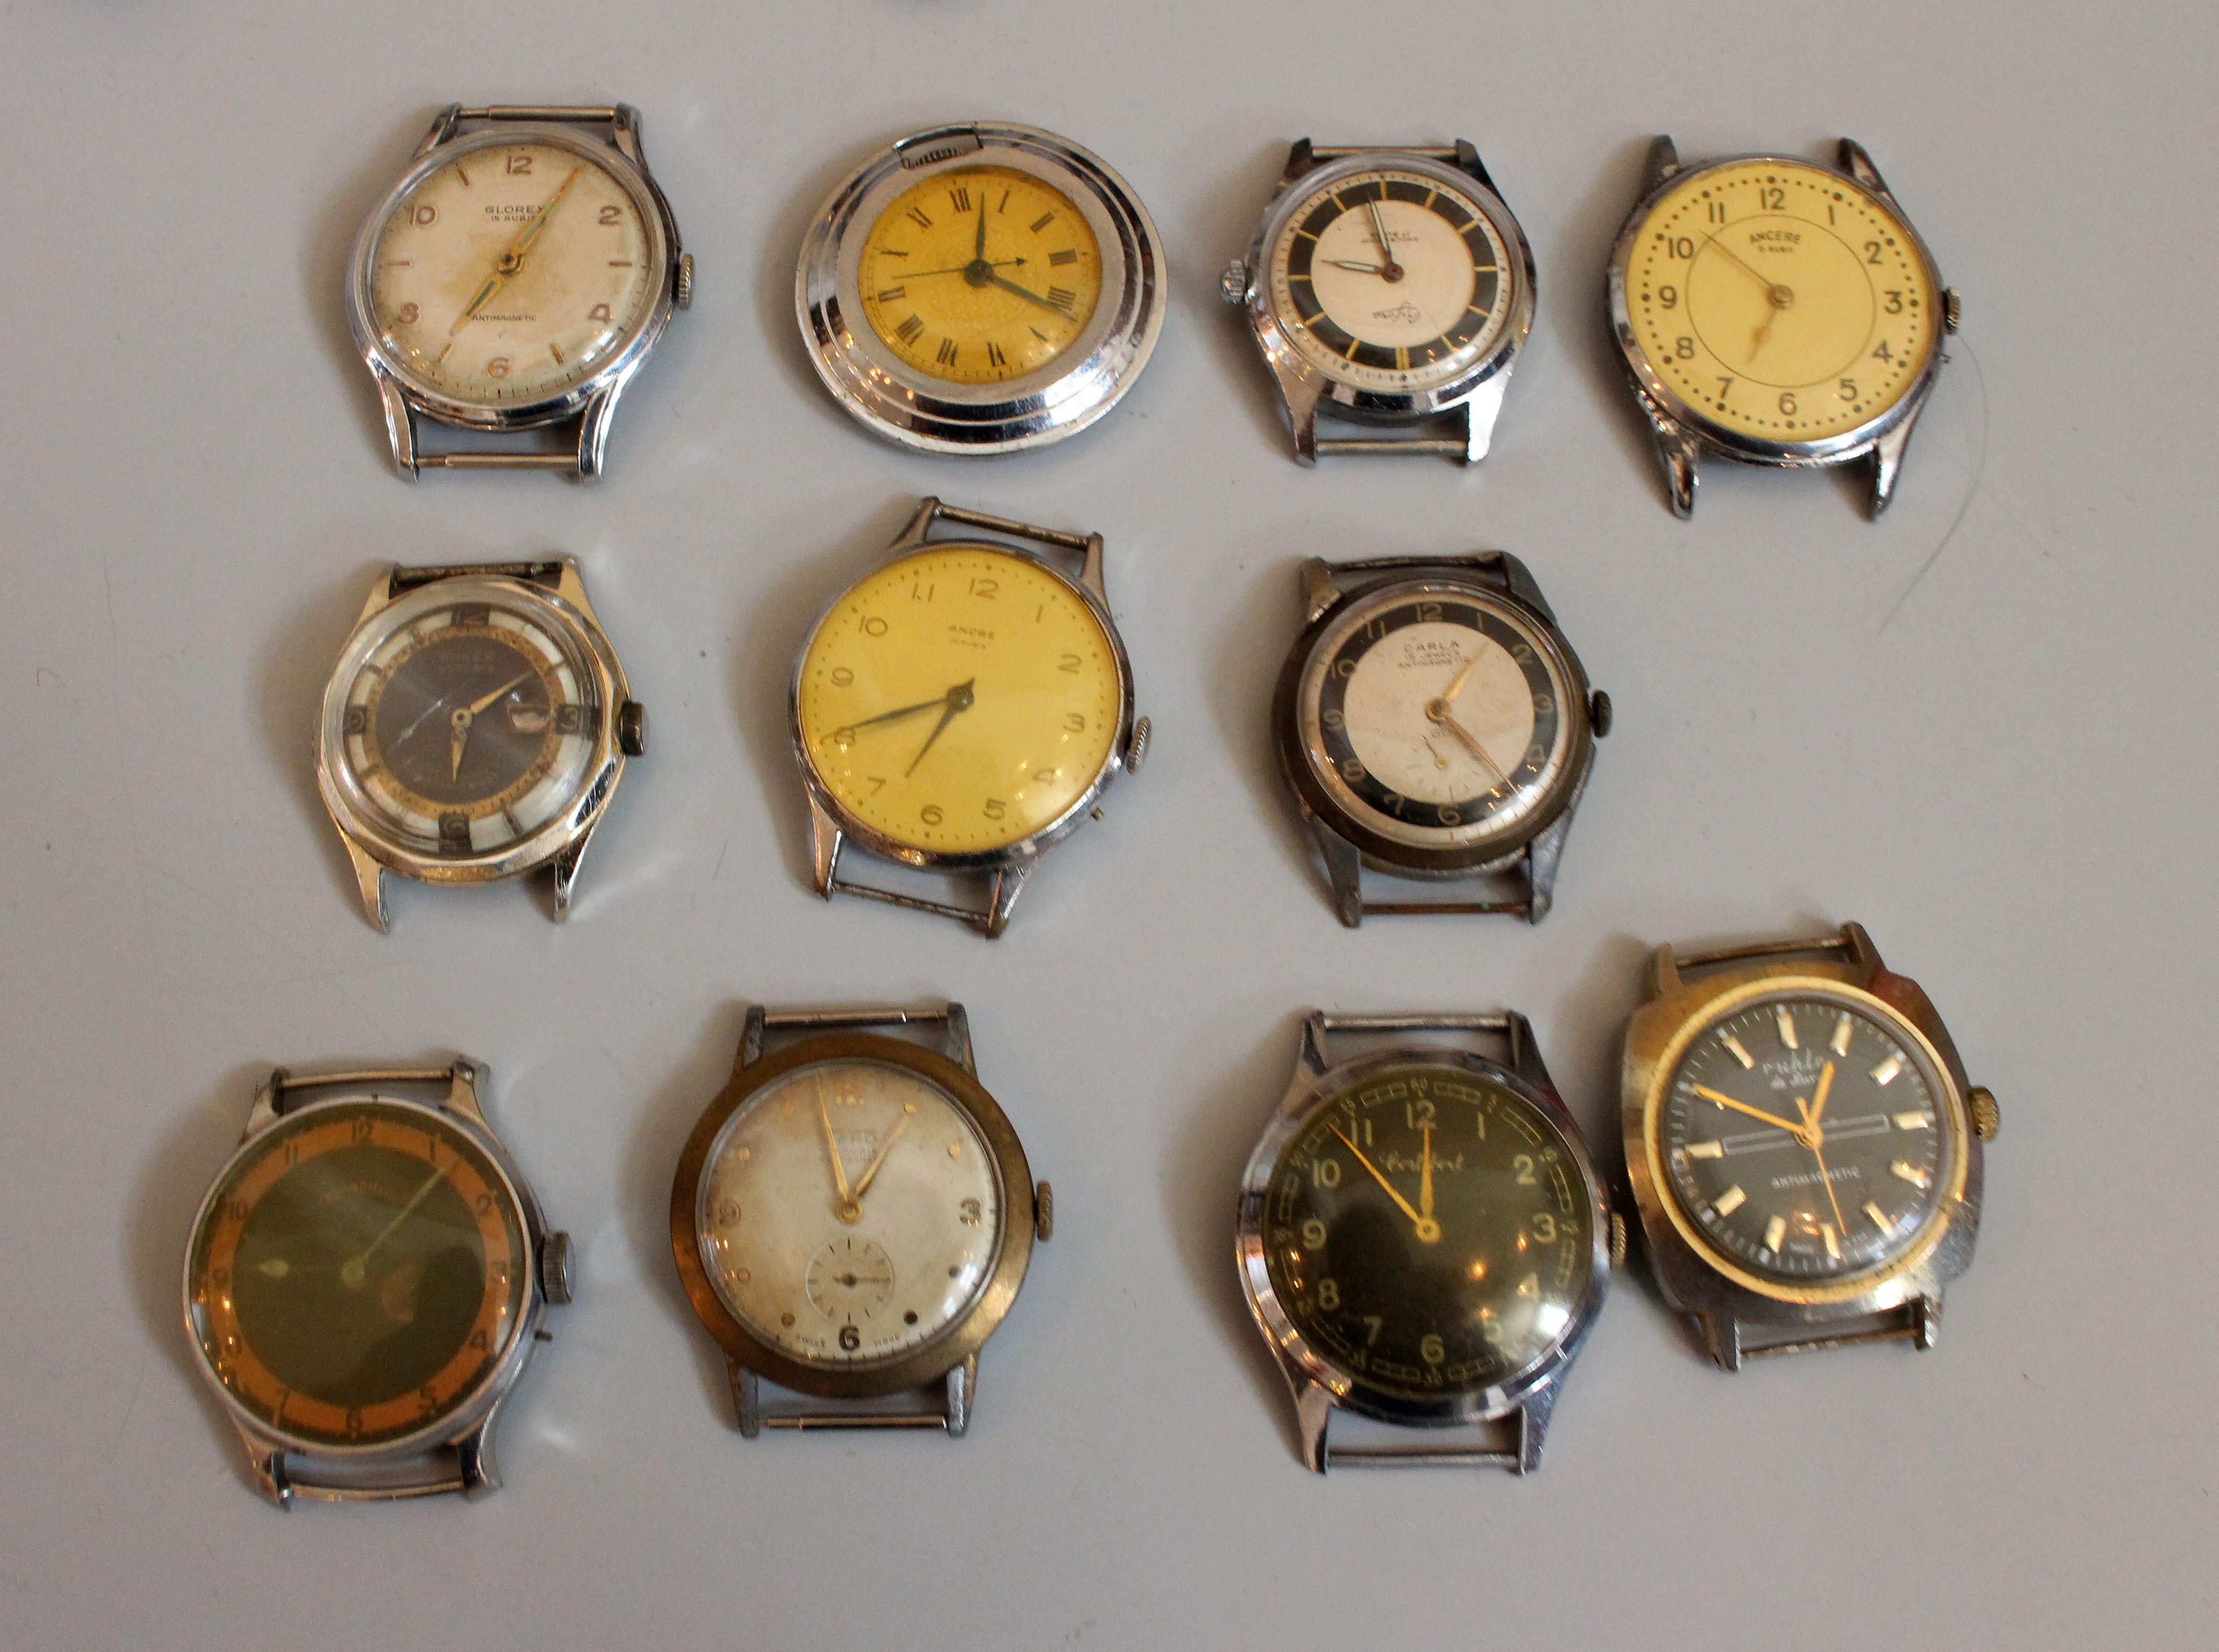 Vintage and Antique wrist watch collection. Total 22 watches . All of them in original condition. 
Leather bends. The watches are functional but needs a movement cleaning which is a normal procedure for the vintage mechanical watches. One price for